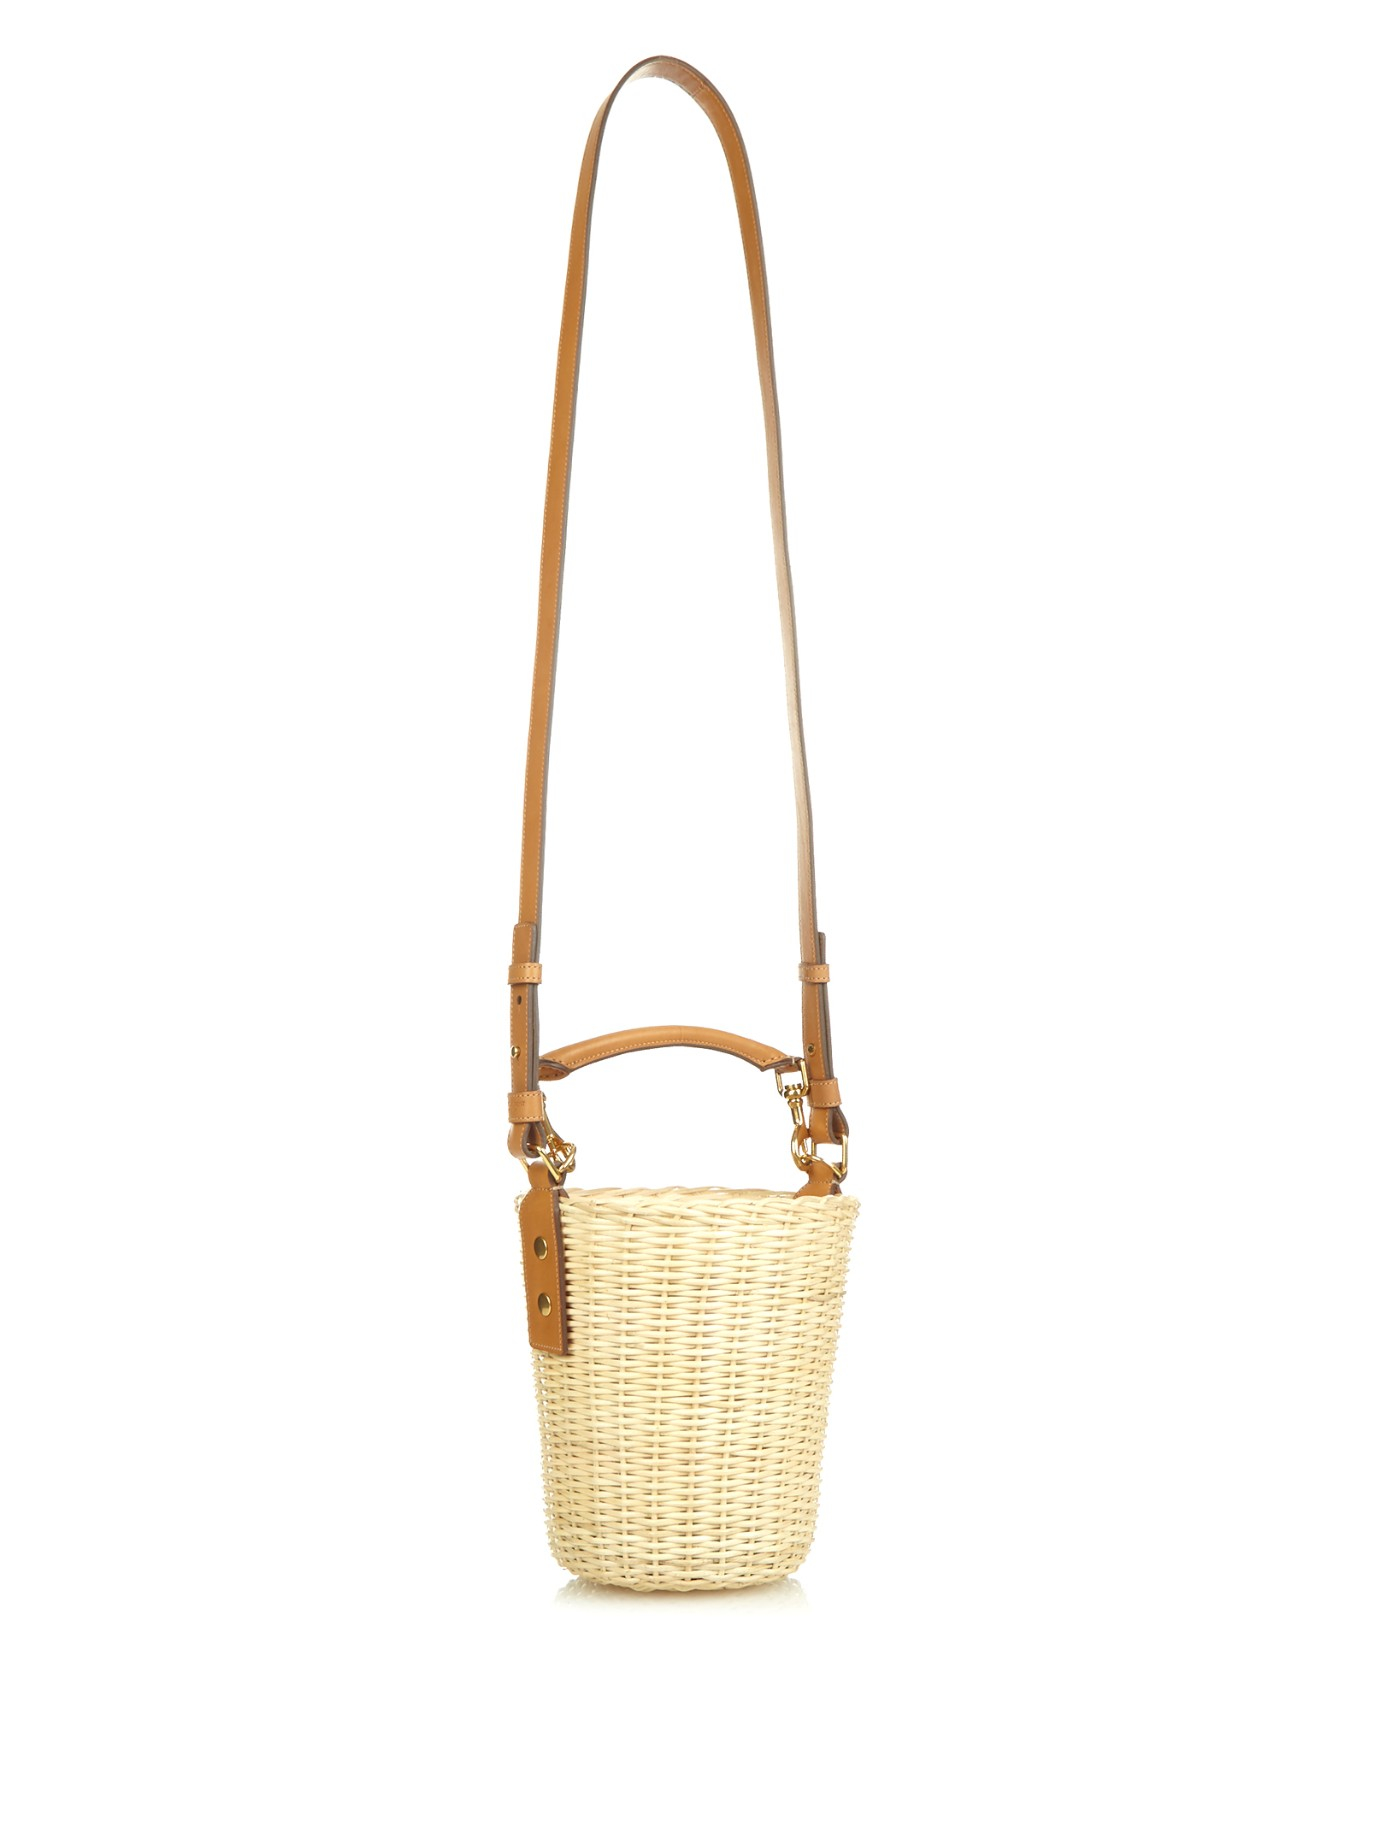 Lyst - Saint Laurent Leather And Raffia Bucket Bag in Natural